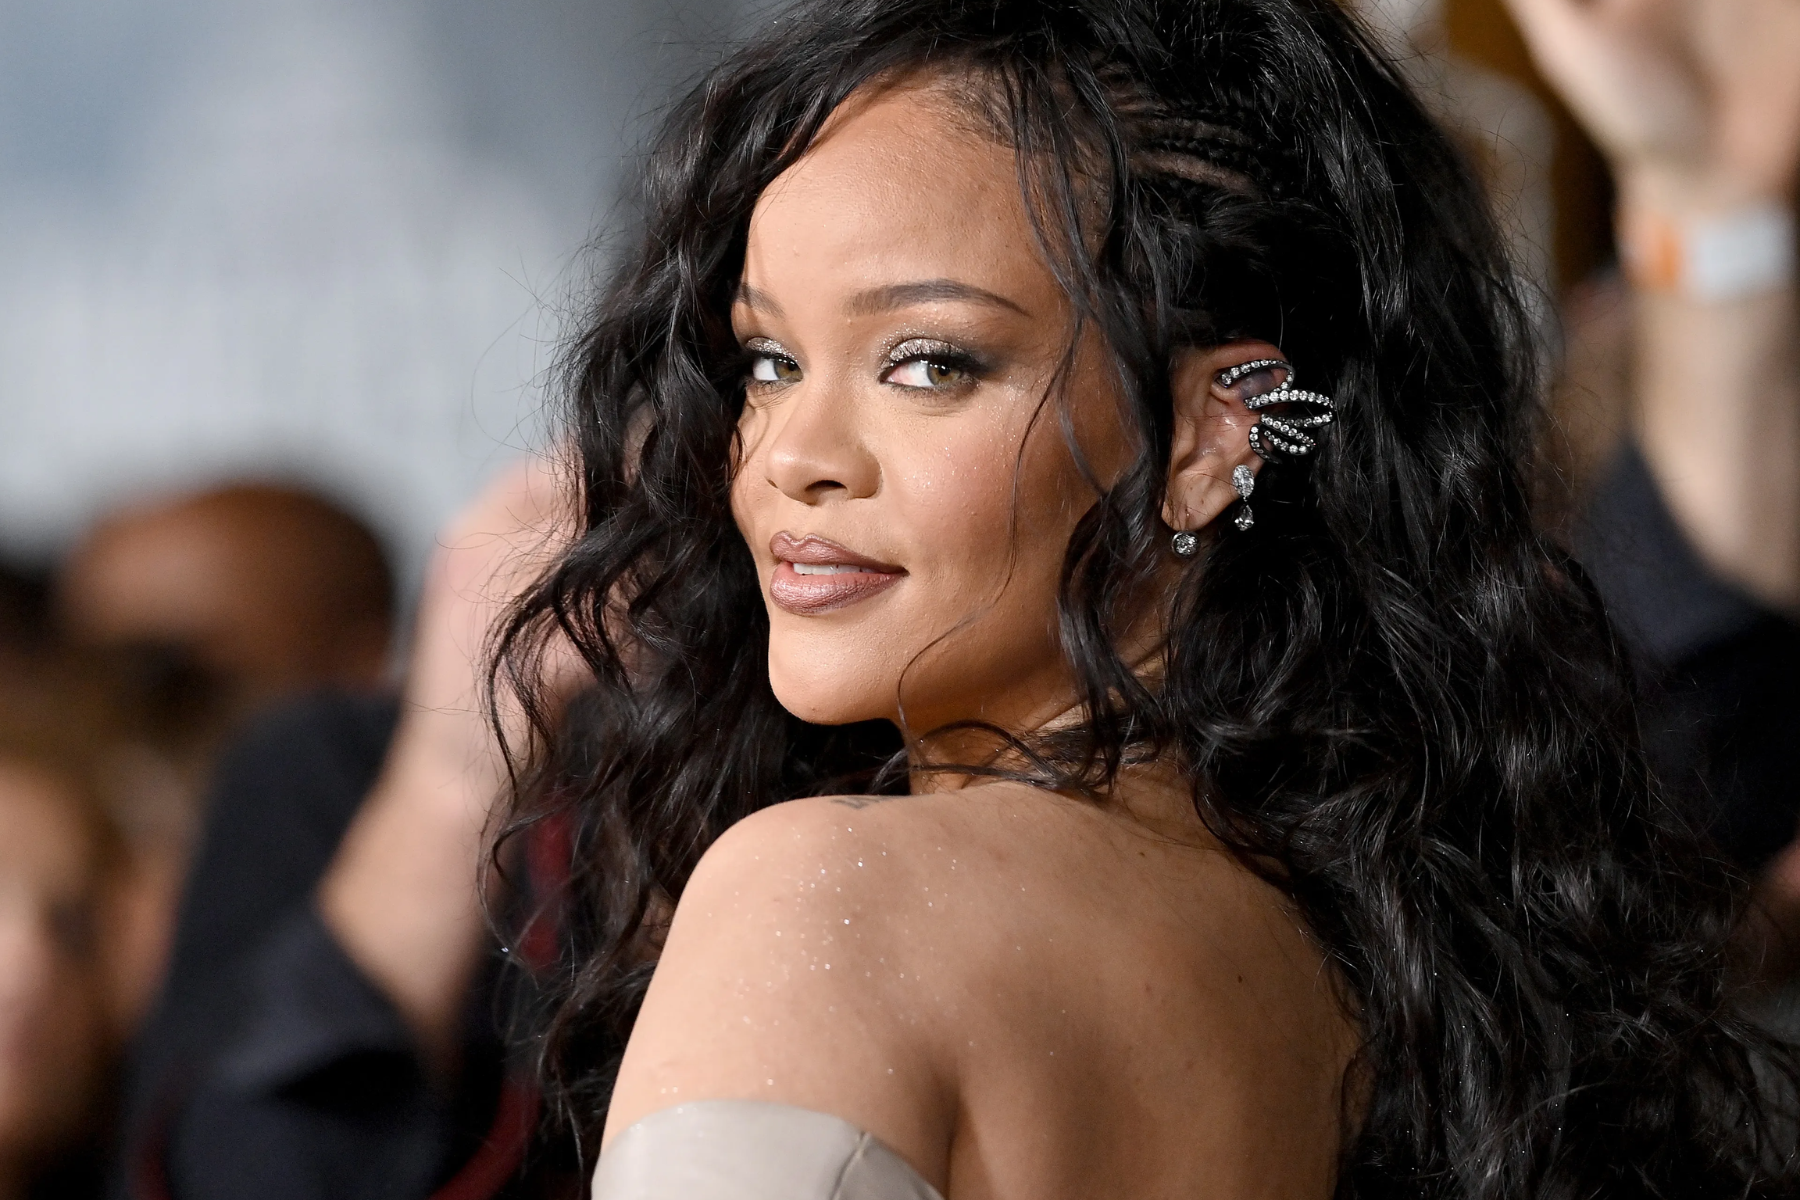 Rihanna Dips Her Toes Into ‘Quiet Luxury’ With The Most Unexpected Diamond Accessory